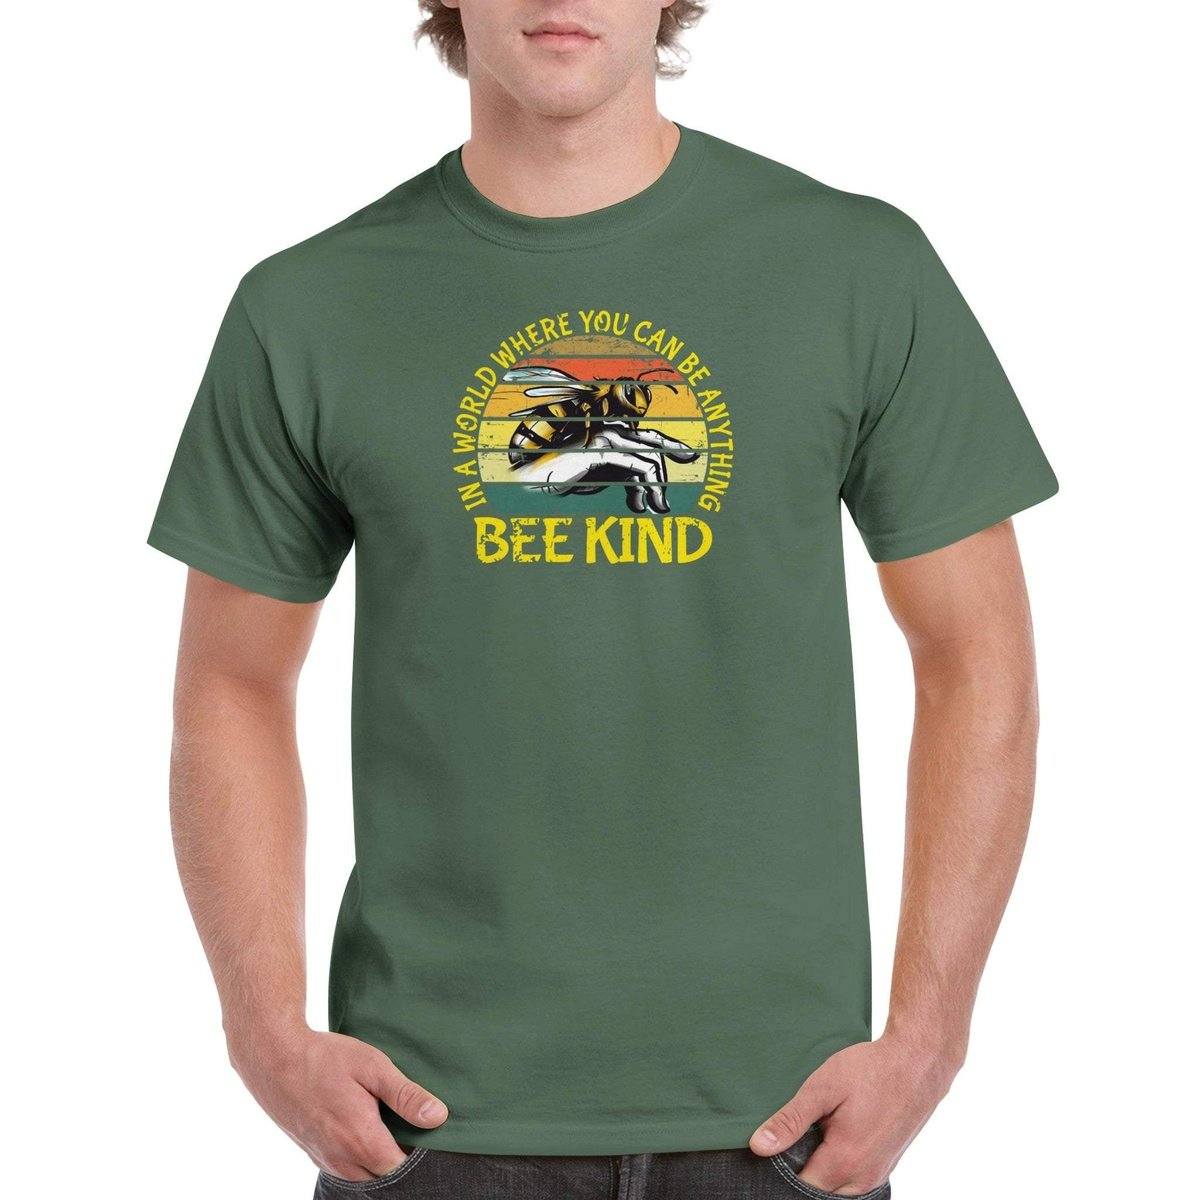 In a world where you can be anything bee kind Tshirt - Retro Vintage Bee - Unisex Crewneck T-shirt Australia Online Color Military Green / S